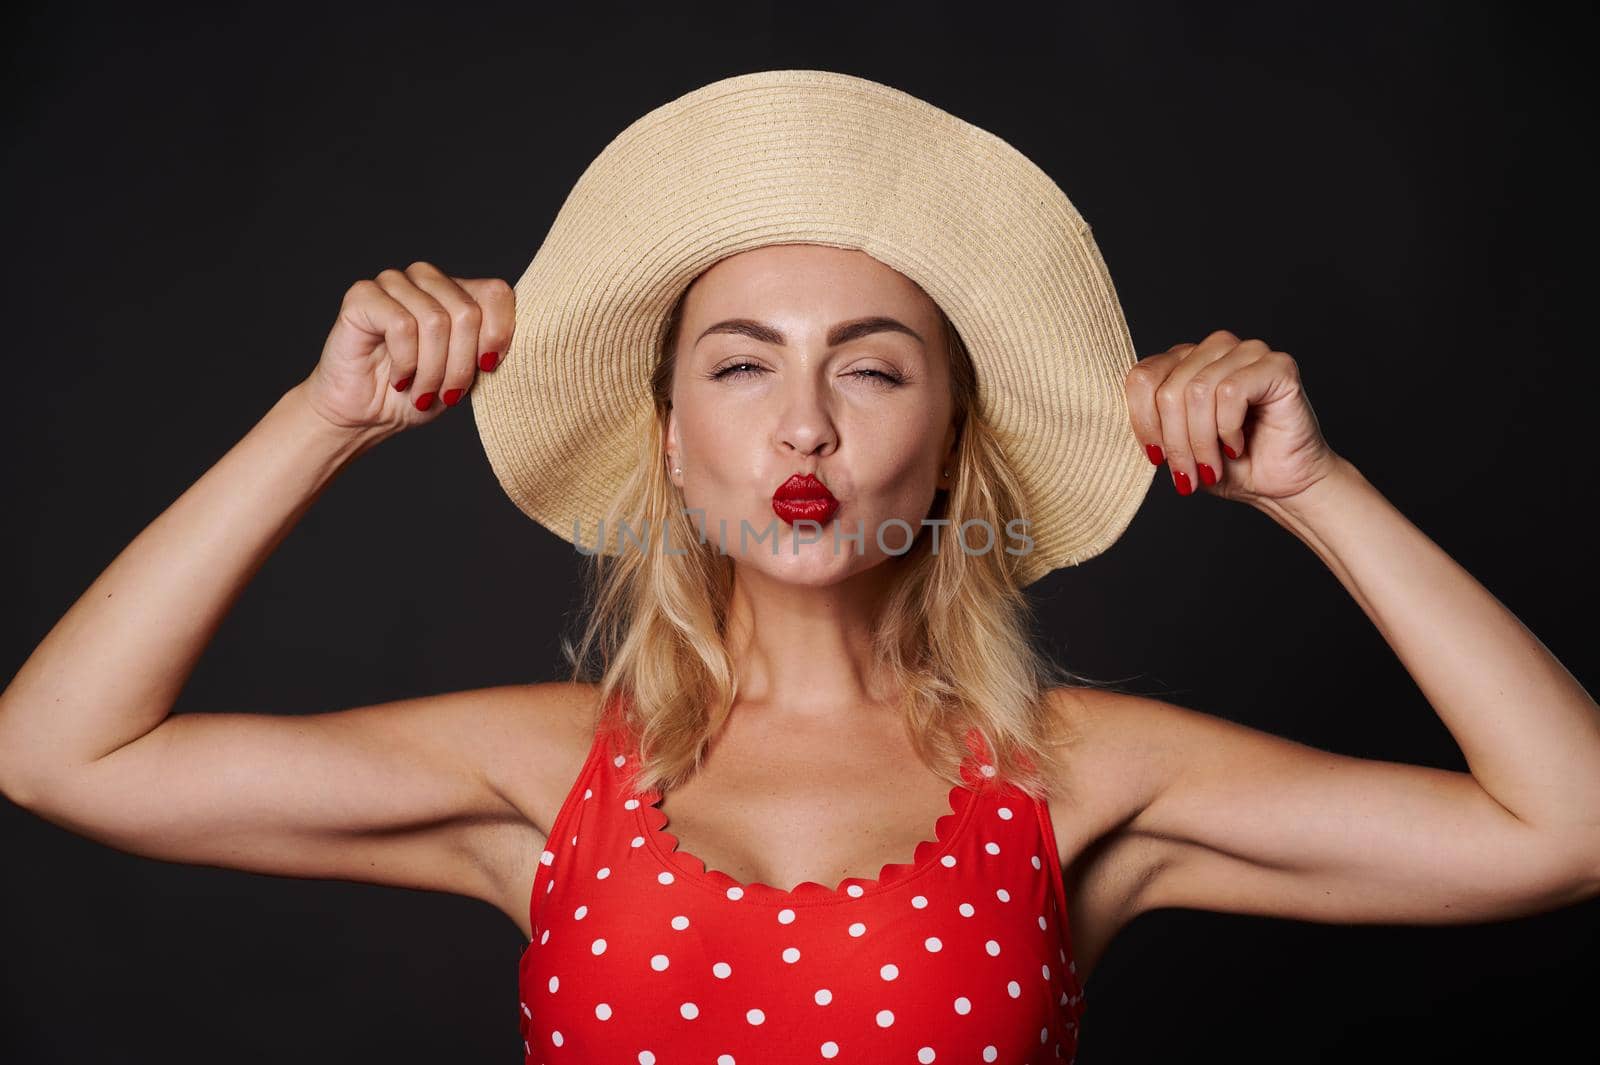 Close-up portrait of a beautiful sexy delightful stunning blonde Caucasian woman in red swimsuit with white polka dots and a straw summer hat sending a kiss, against black background with copy space